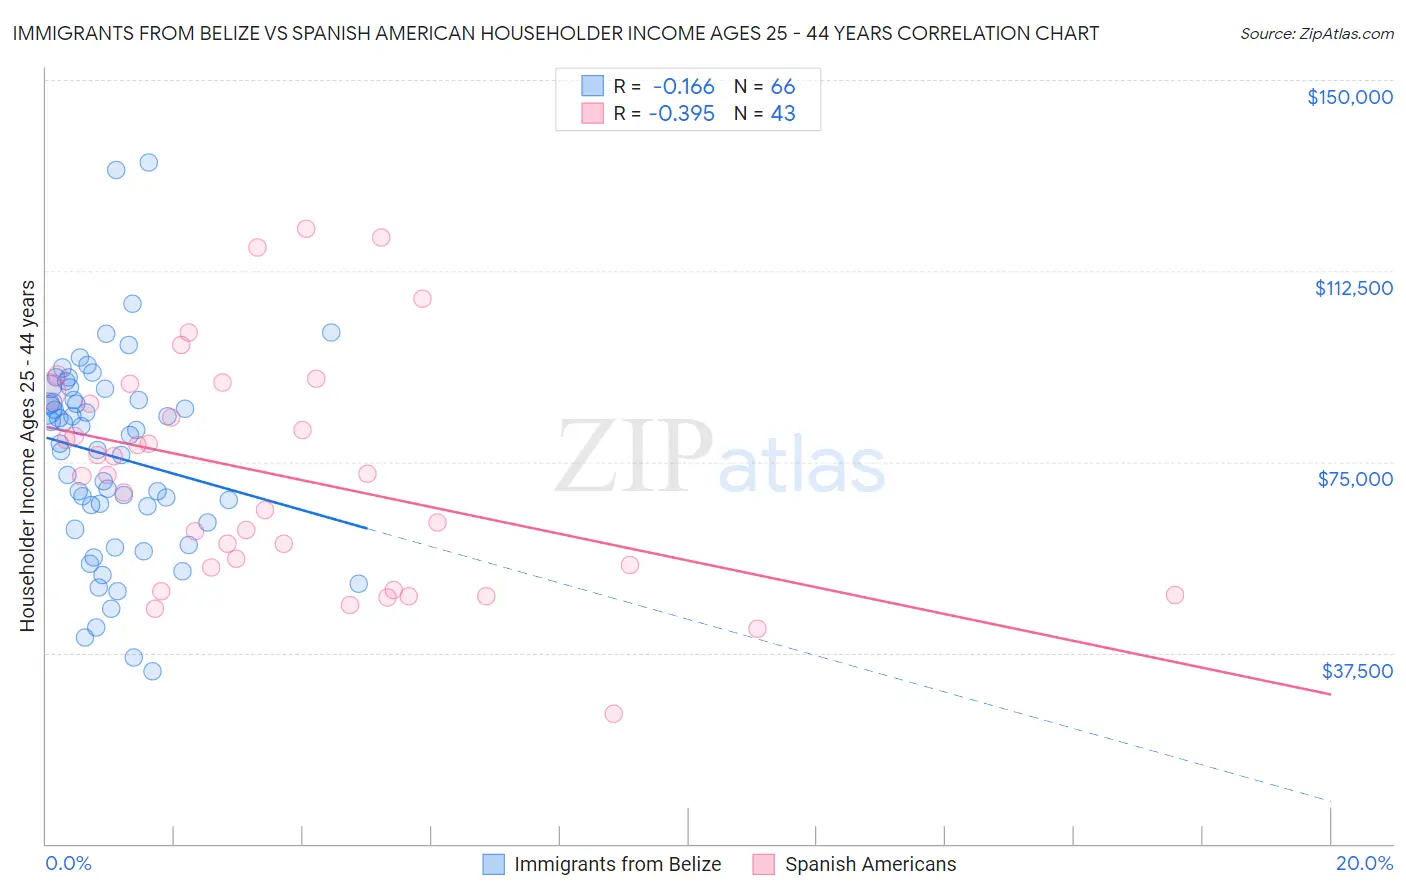 Immigrants from Belize vs Spanish American Householder Income Ages 25 - 44 years